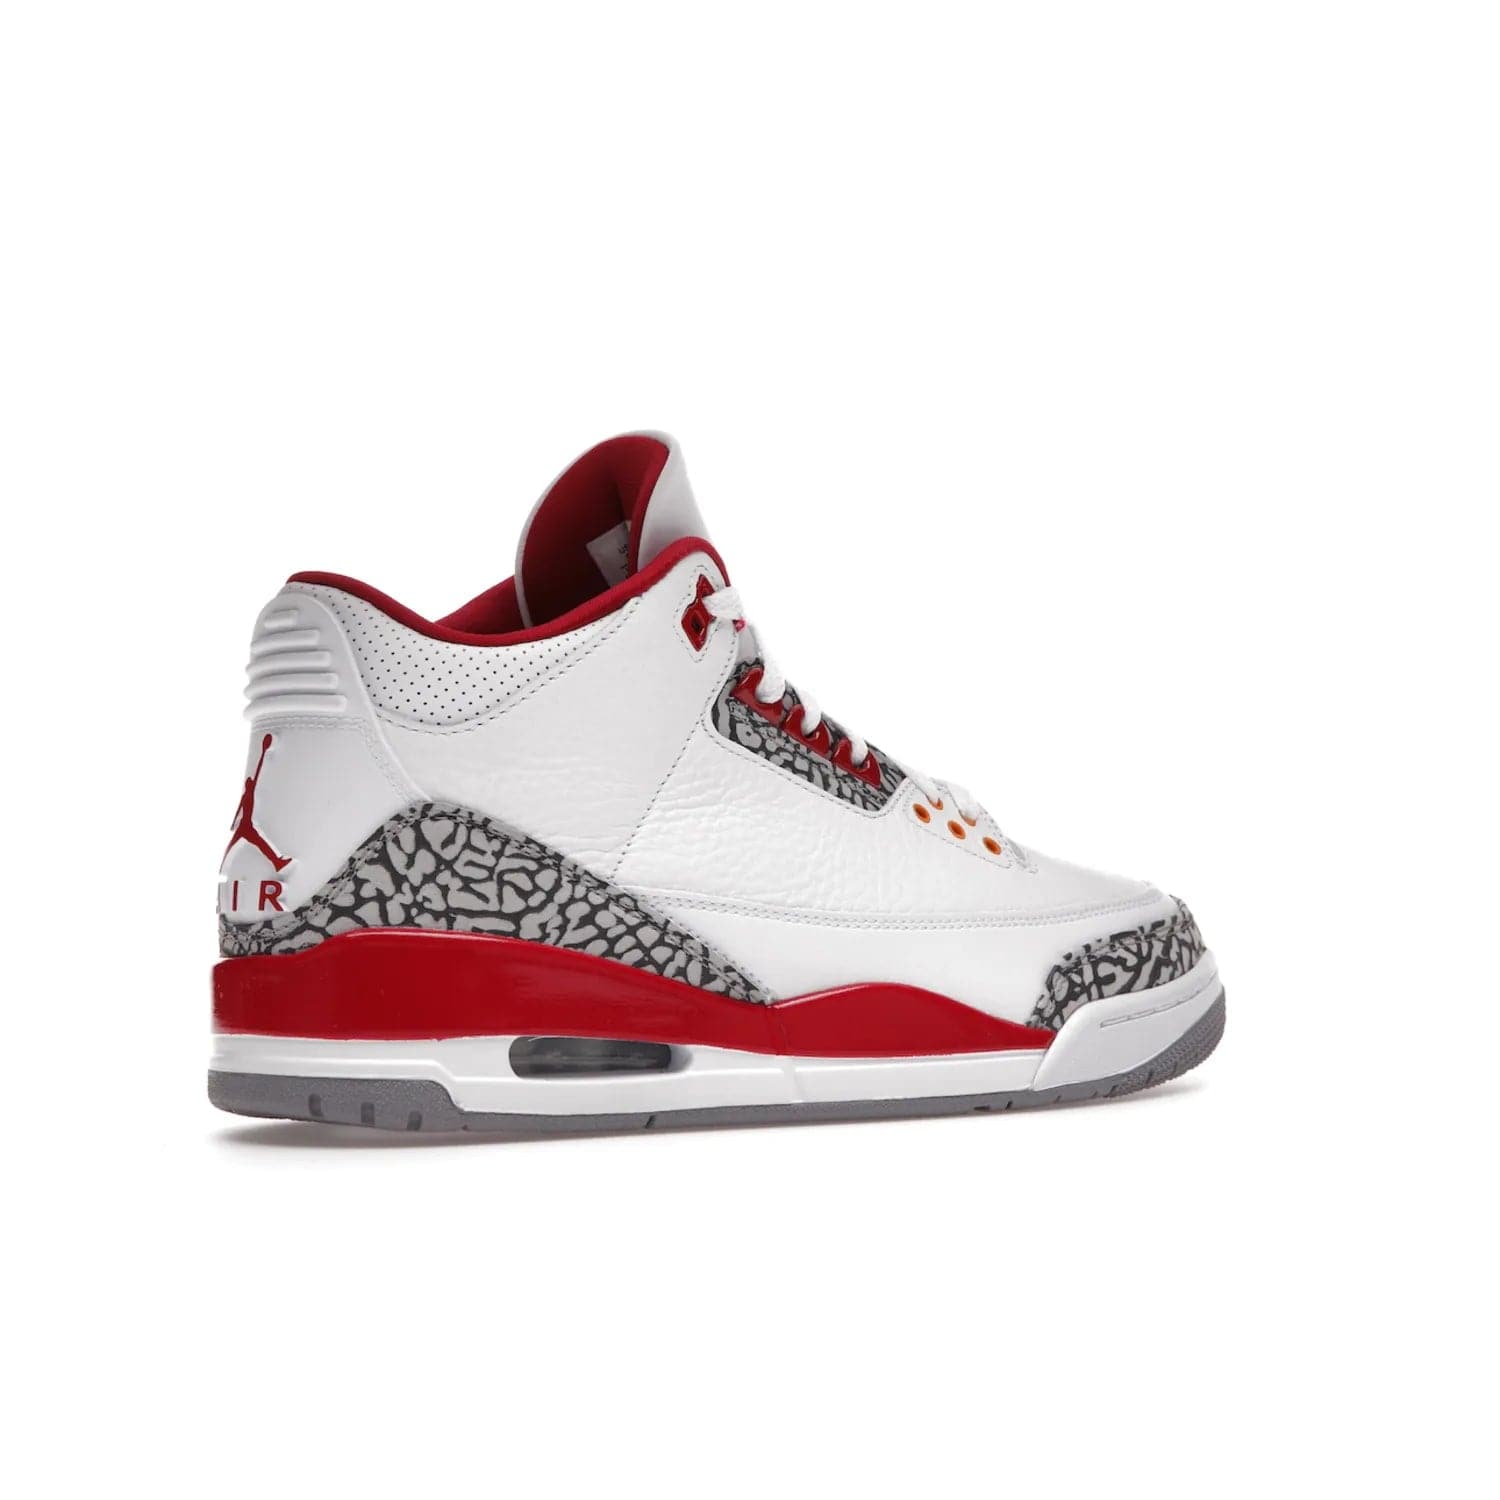 Jordan 3 Retro Cardinal Red - Image 34 - Only at www.BallersClubKickz.com - Air Jordan 3 Retro Cardinal Red combines classic style and modern appeal - white tumbled leather, signature Elephant Print overlays, cardinal red midsoles, Jumpman logo embroidery. Available Feb 2022.